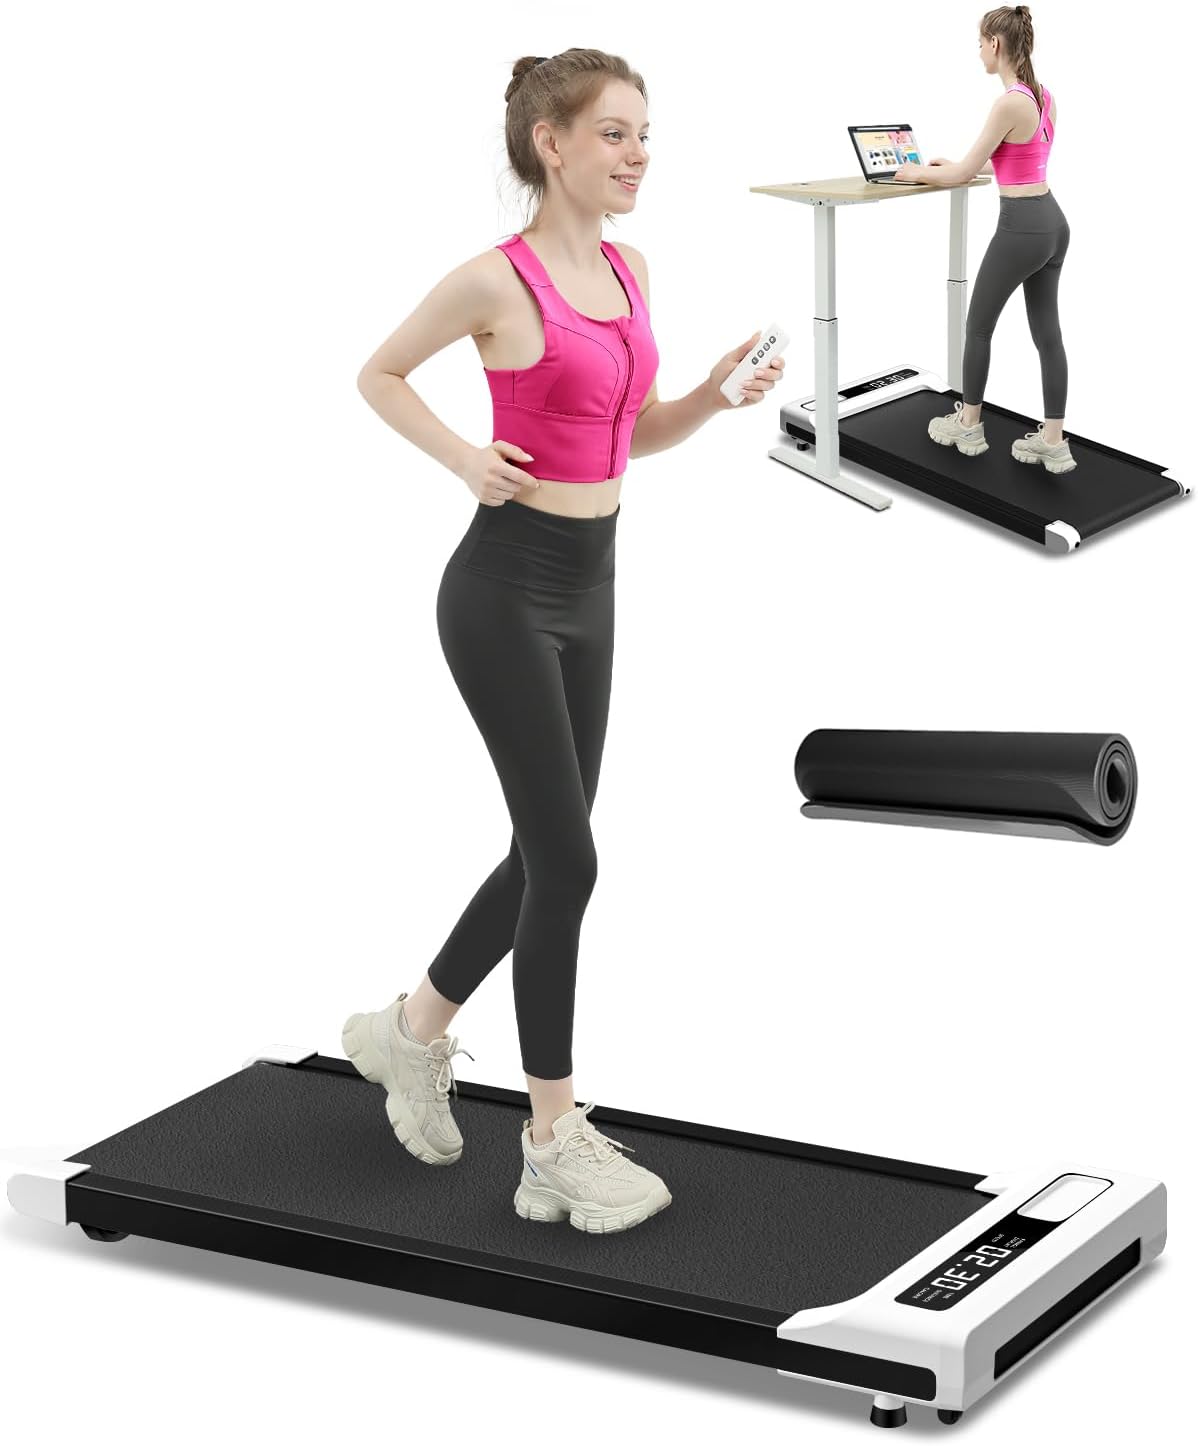 NOTIUS Walking Pad Treadmill Under Desk,Quiet Compact Desk Treadmill for Work from Home Office,Large Capacity with Rmote Control(𝐋𝐢𝐟𝐞𝐭𝐢𝐦𝐞 𝐖𝐚𝐫𝐫𝐚𝐧𝐭𝐲)